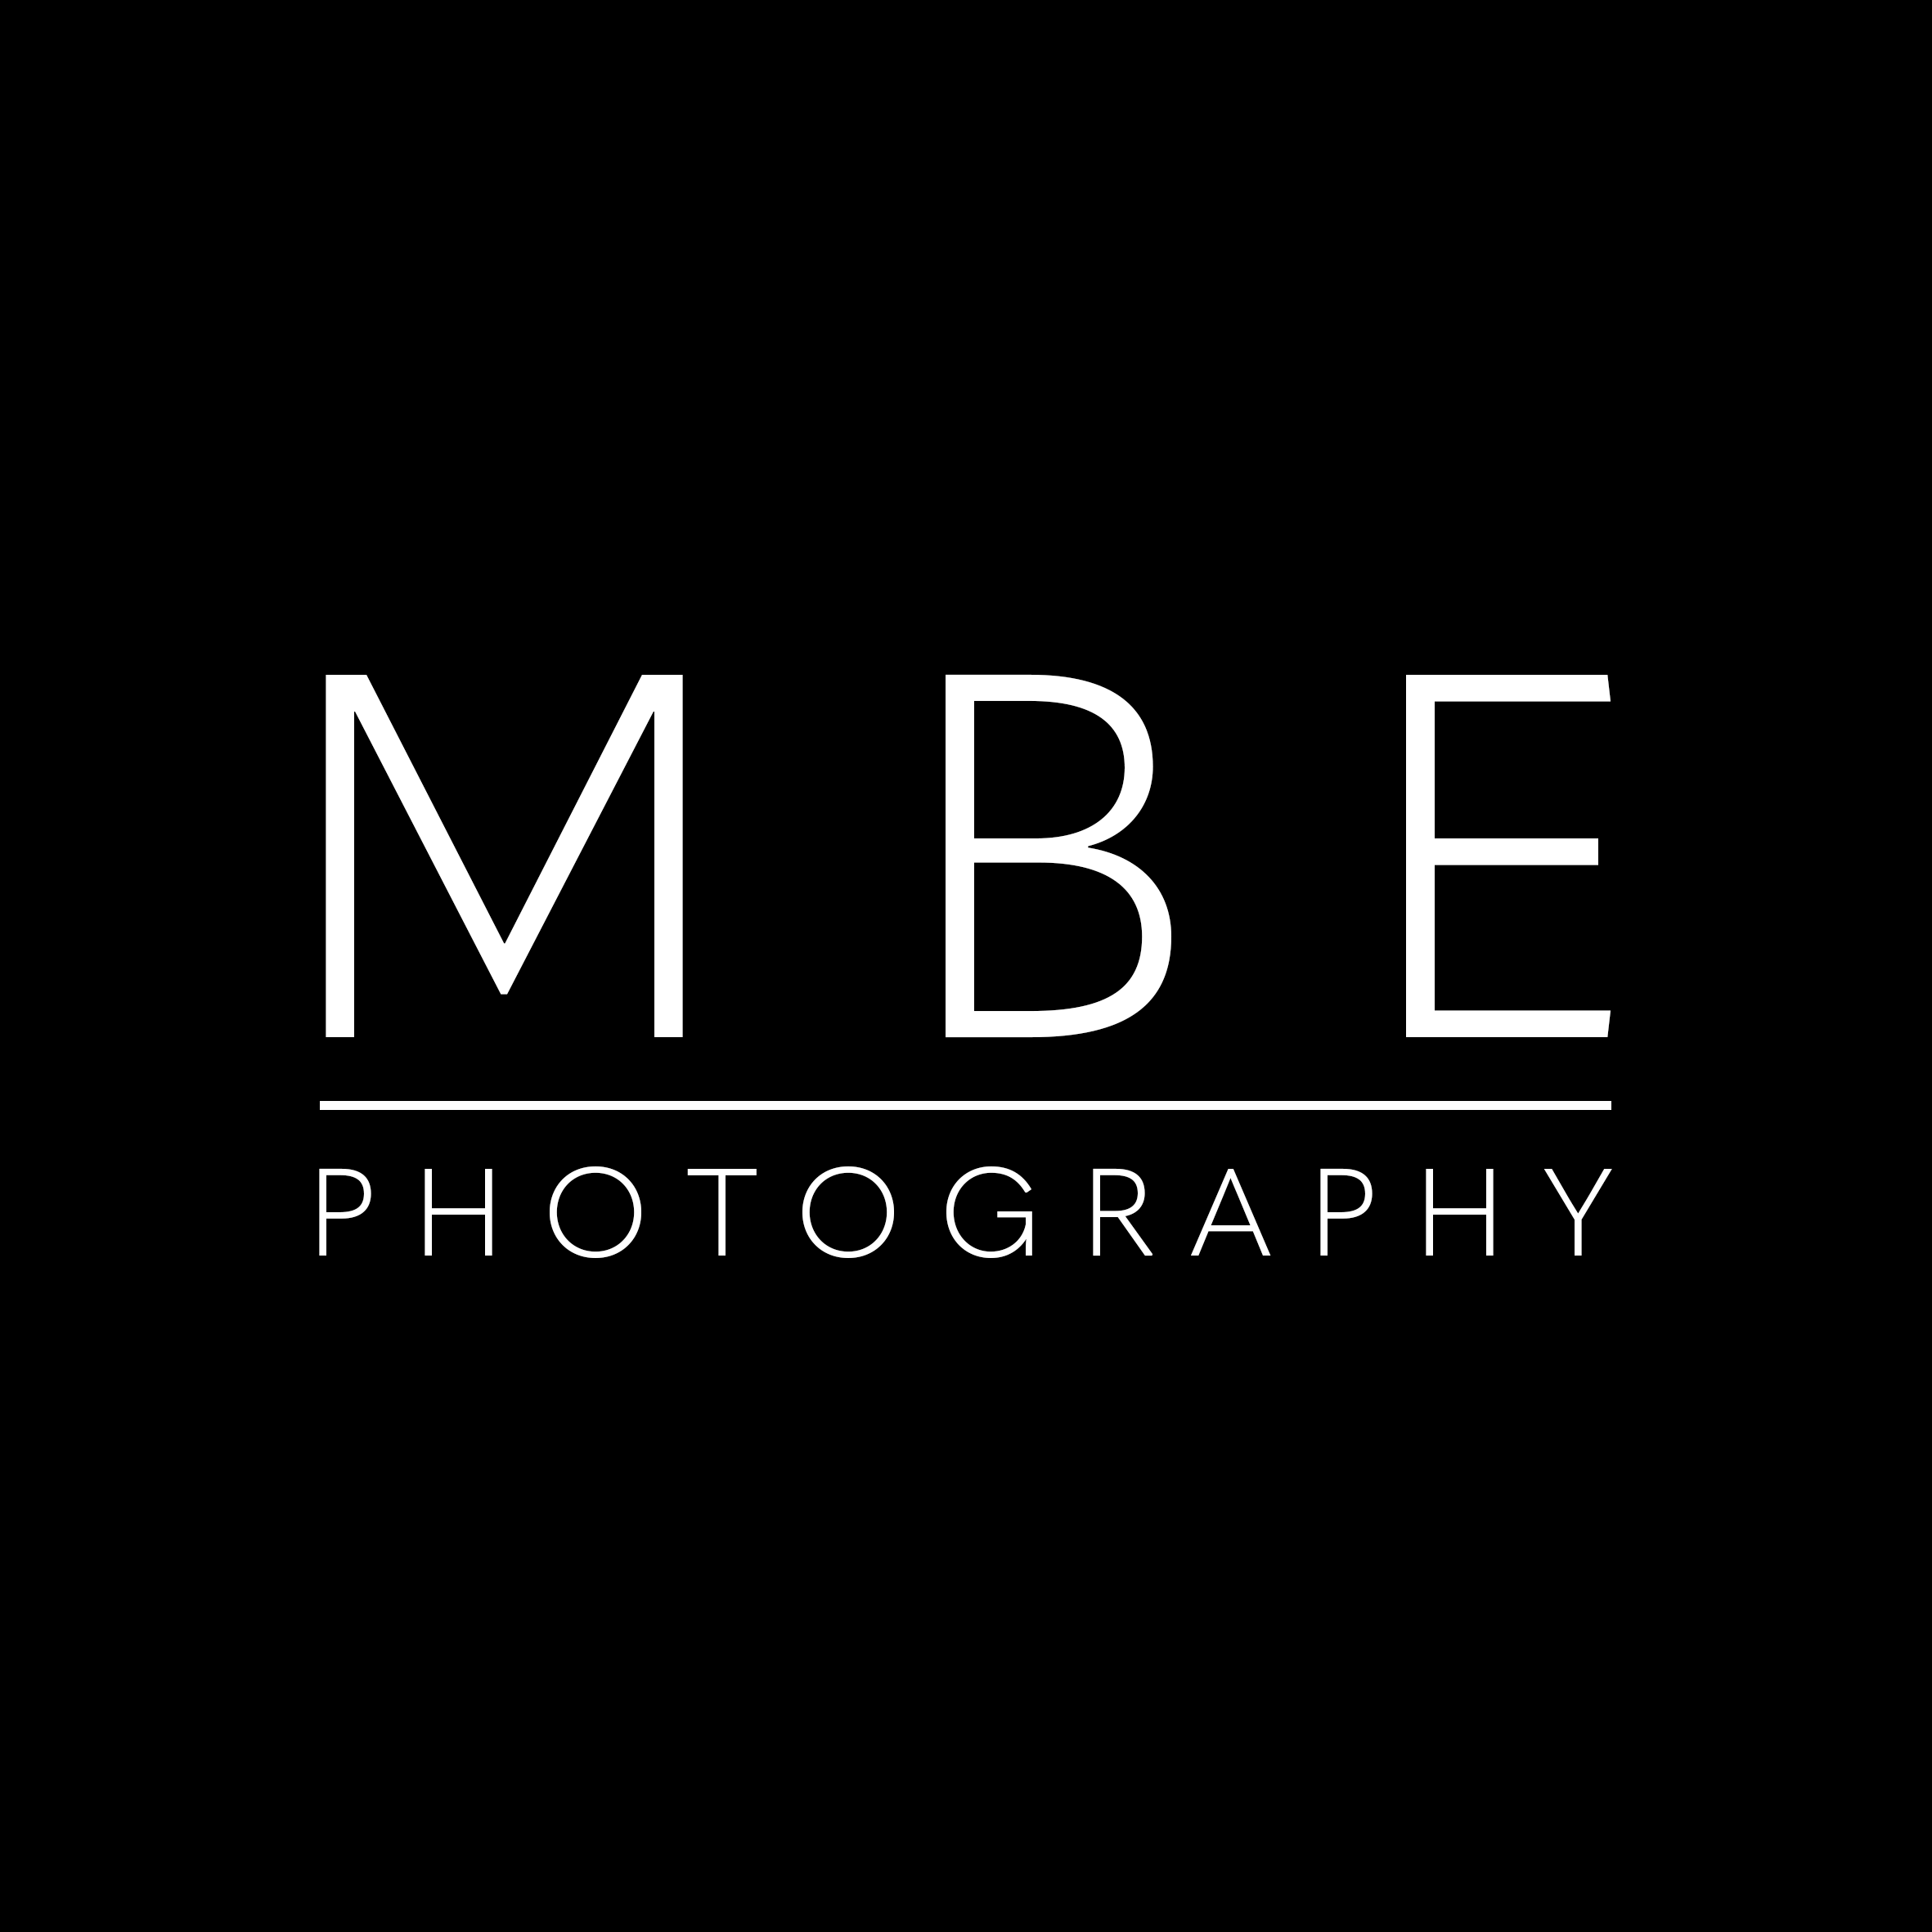 MBE Photography